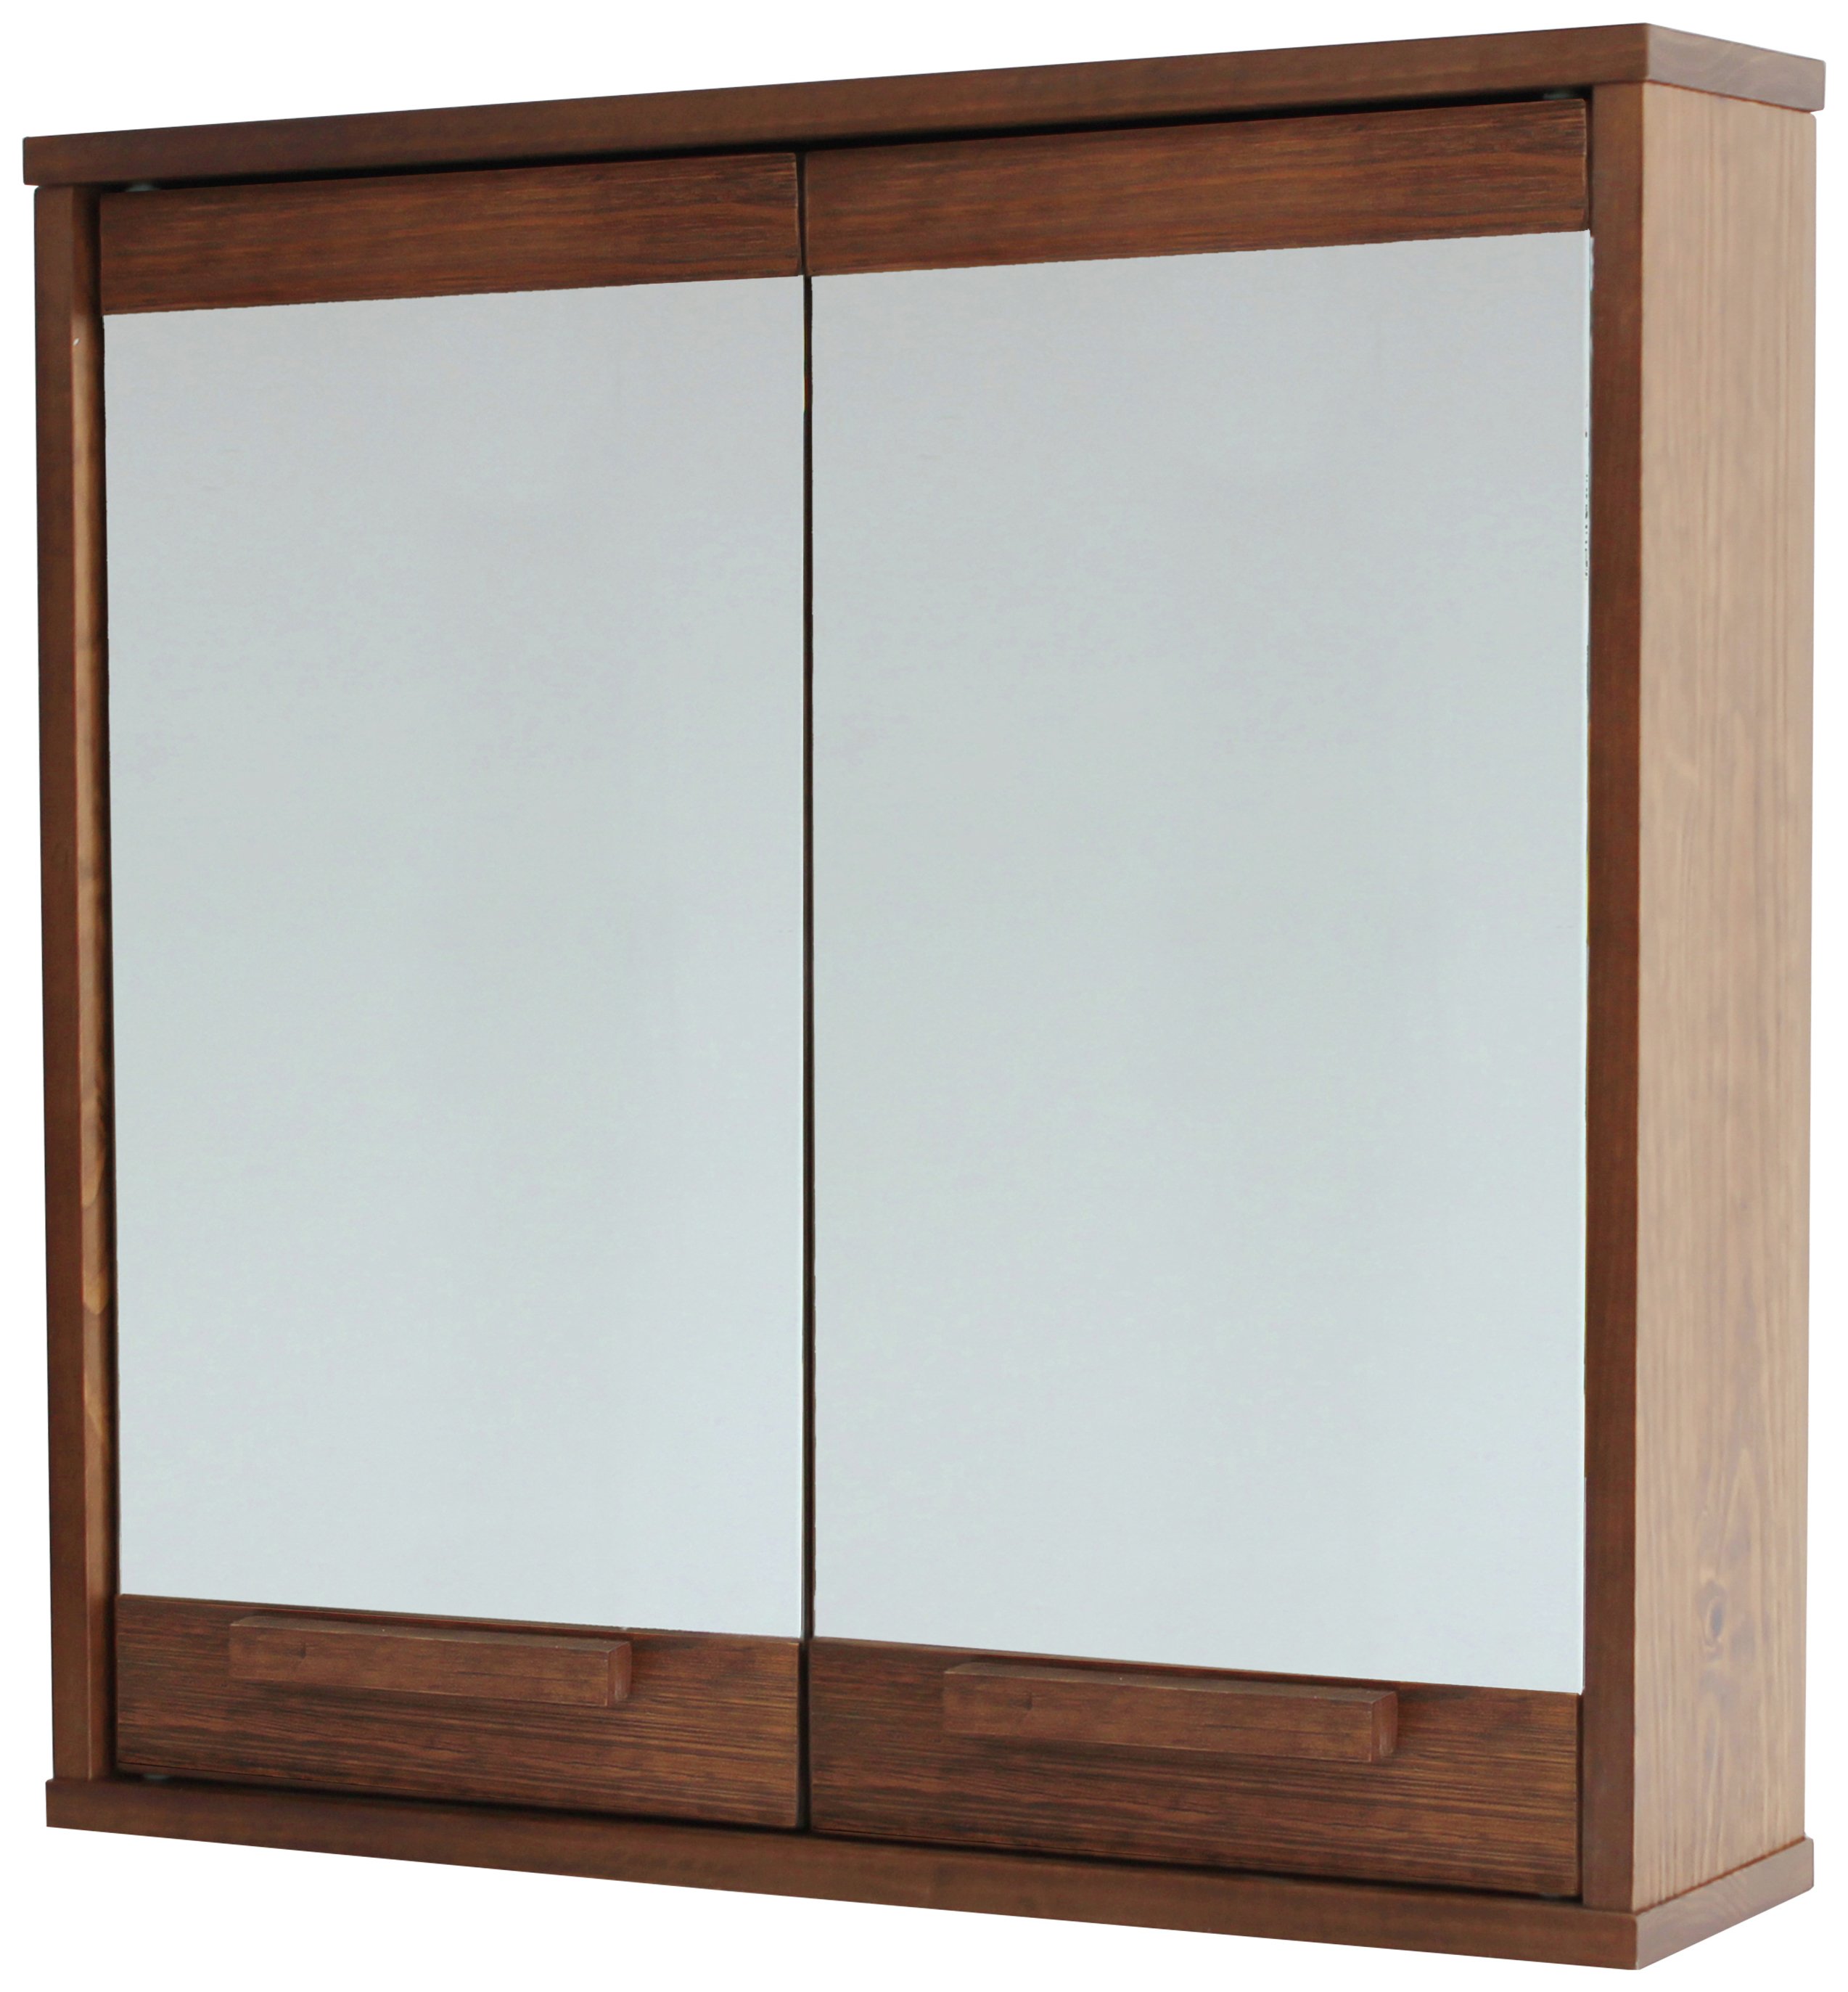 Argos Home Cranbrook Solid Pine Mirrored Wall Cabinet review